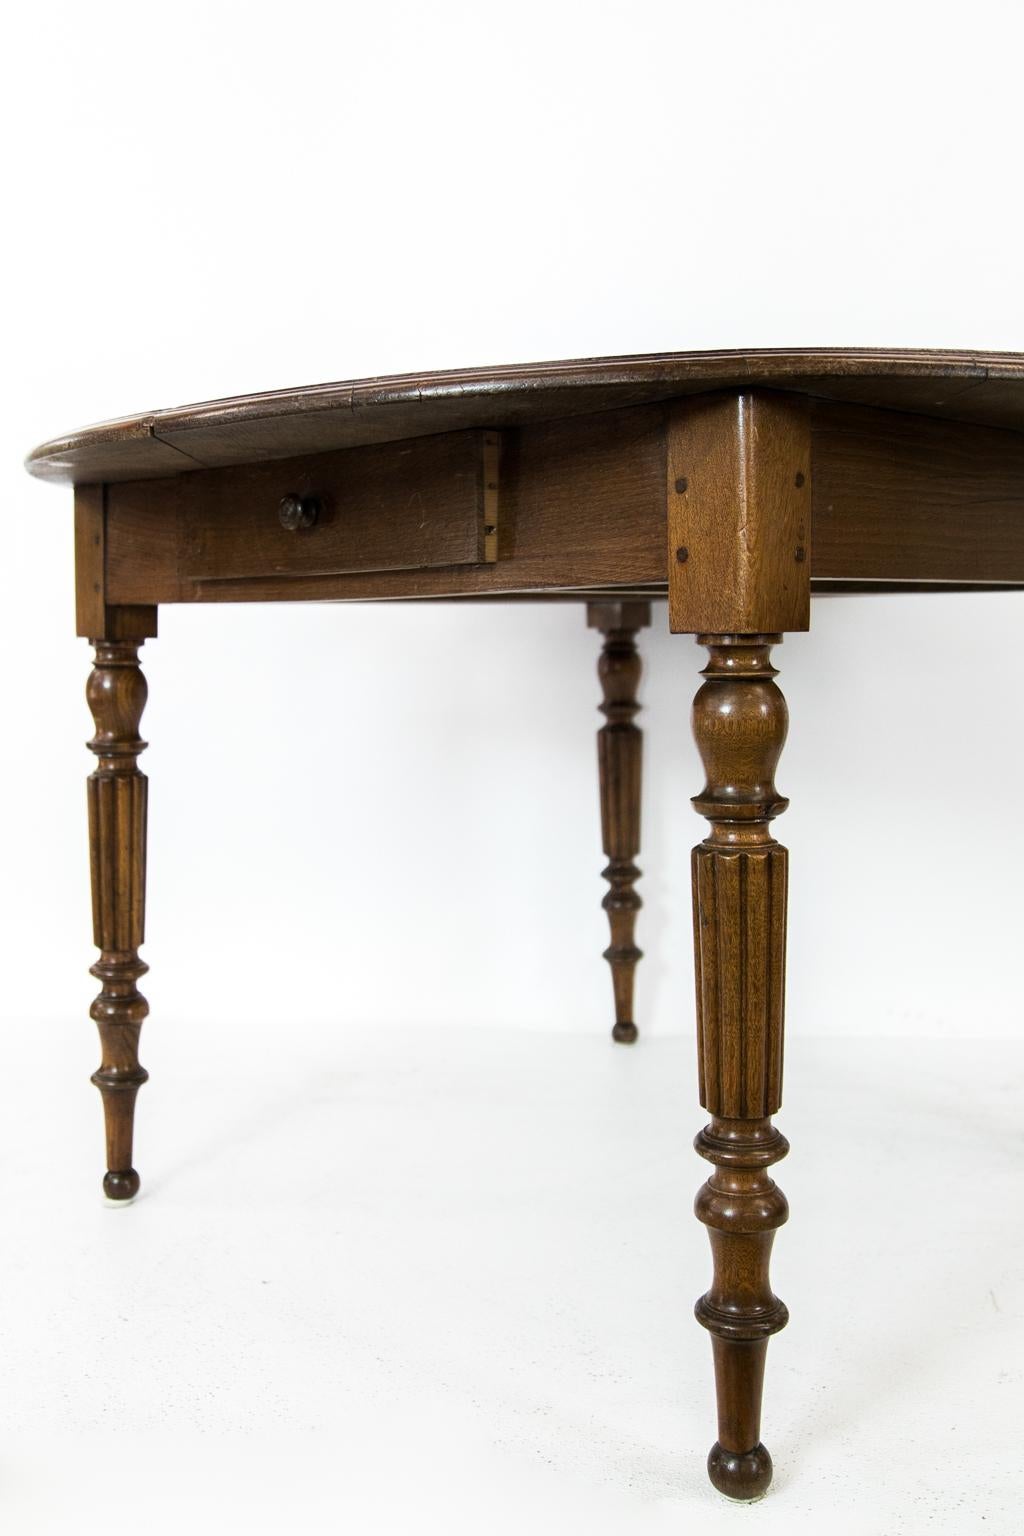 french oak round dining table